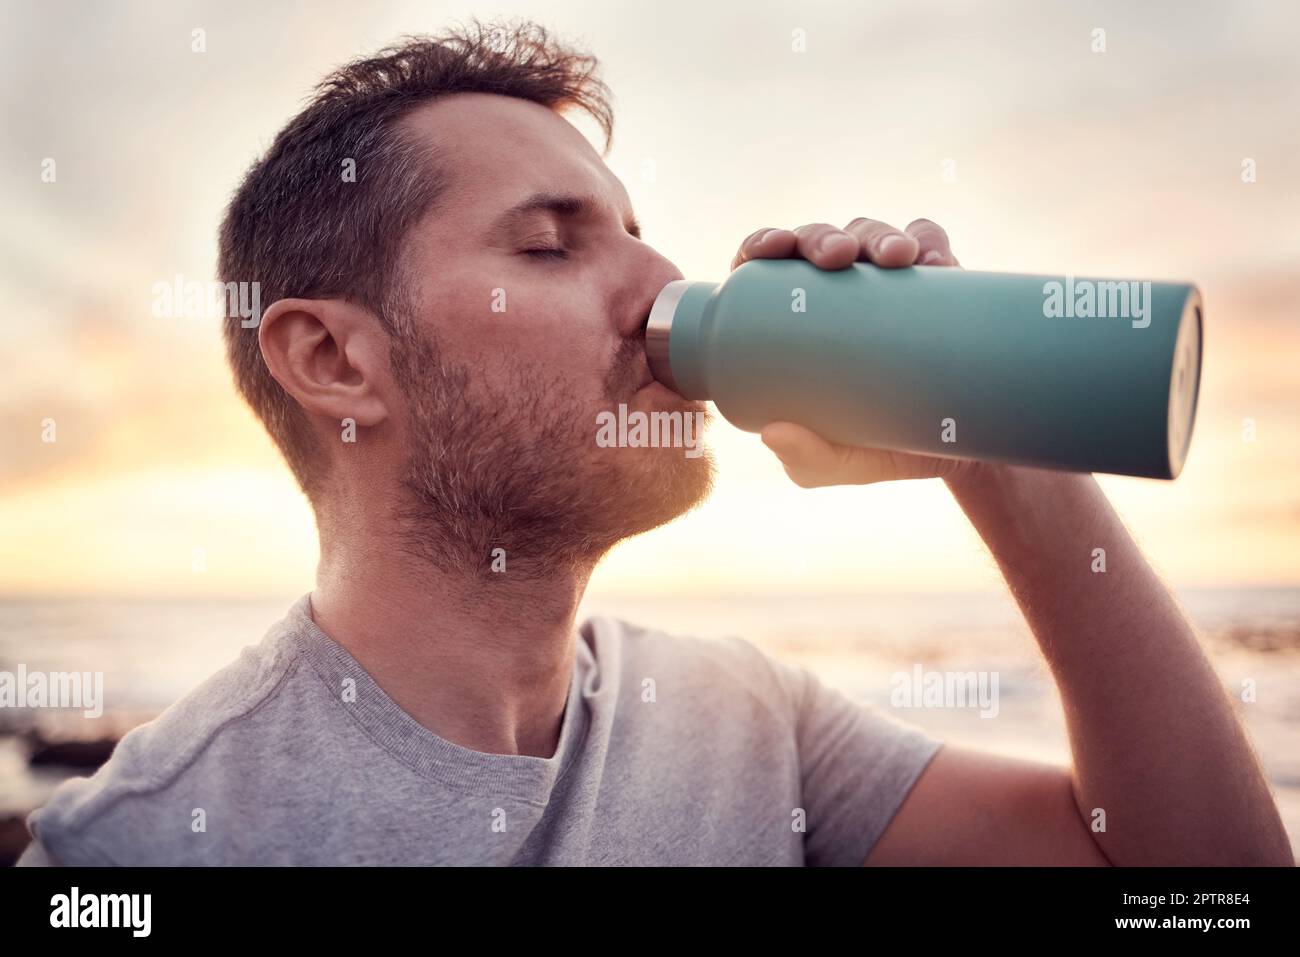 https://c8.alamy.com/comp/2PTR8E4/man-fitness-and-water-bottle-with-sunset-beach-background-for-thirst-hydration-and-healthy-lifestyle-while-outdoor-for-exercise-workout-and-trainin-2PTR8E4.jpg